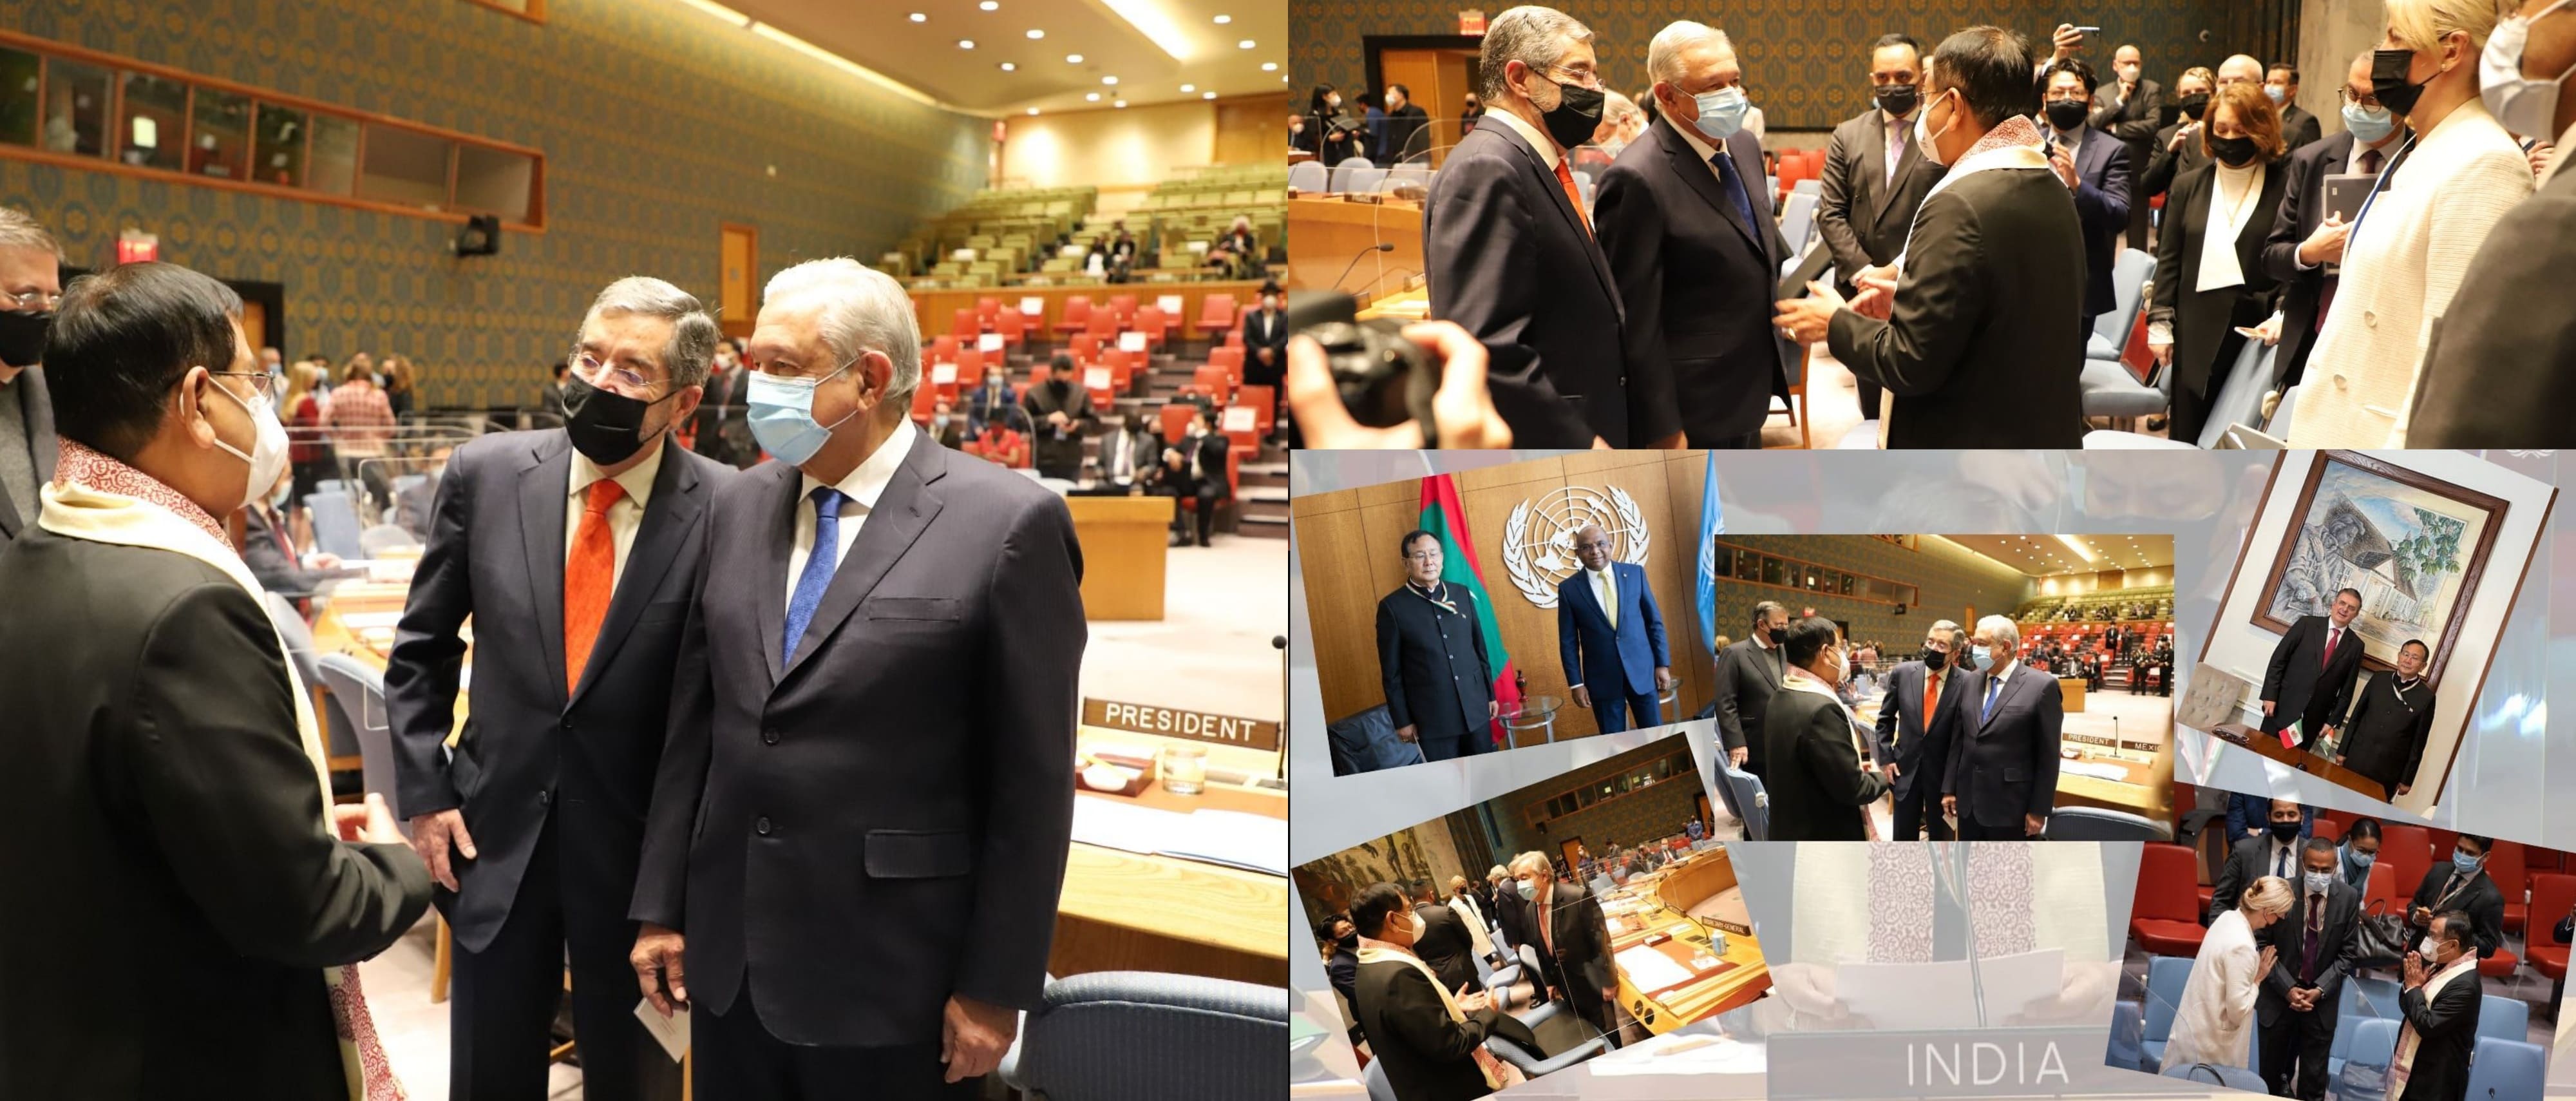  India's Minister of State for External Affairs Dr.Rajkumar Ranjan Singh met President of Mexico H.E. Andres Manual Lopez Obrador on sidelines of UNSC session. Also, he had a bilateral meeting with Foreign Minister of Mexico H.E. Marcelo Ebrard. 